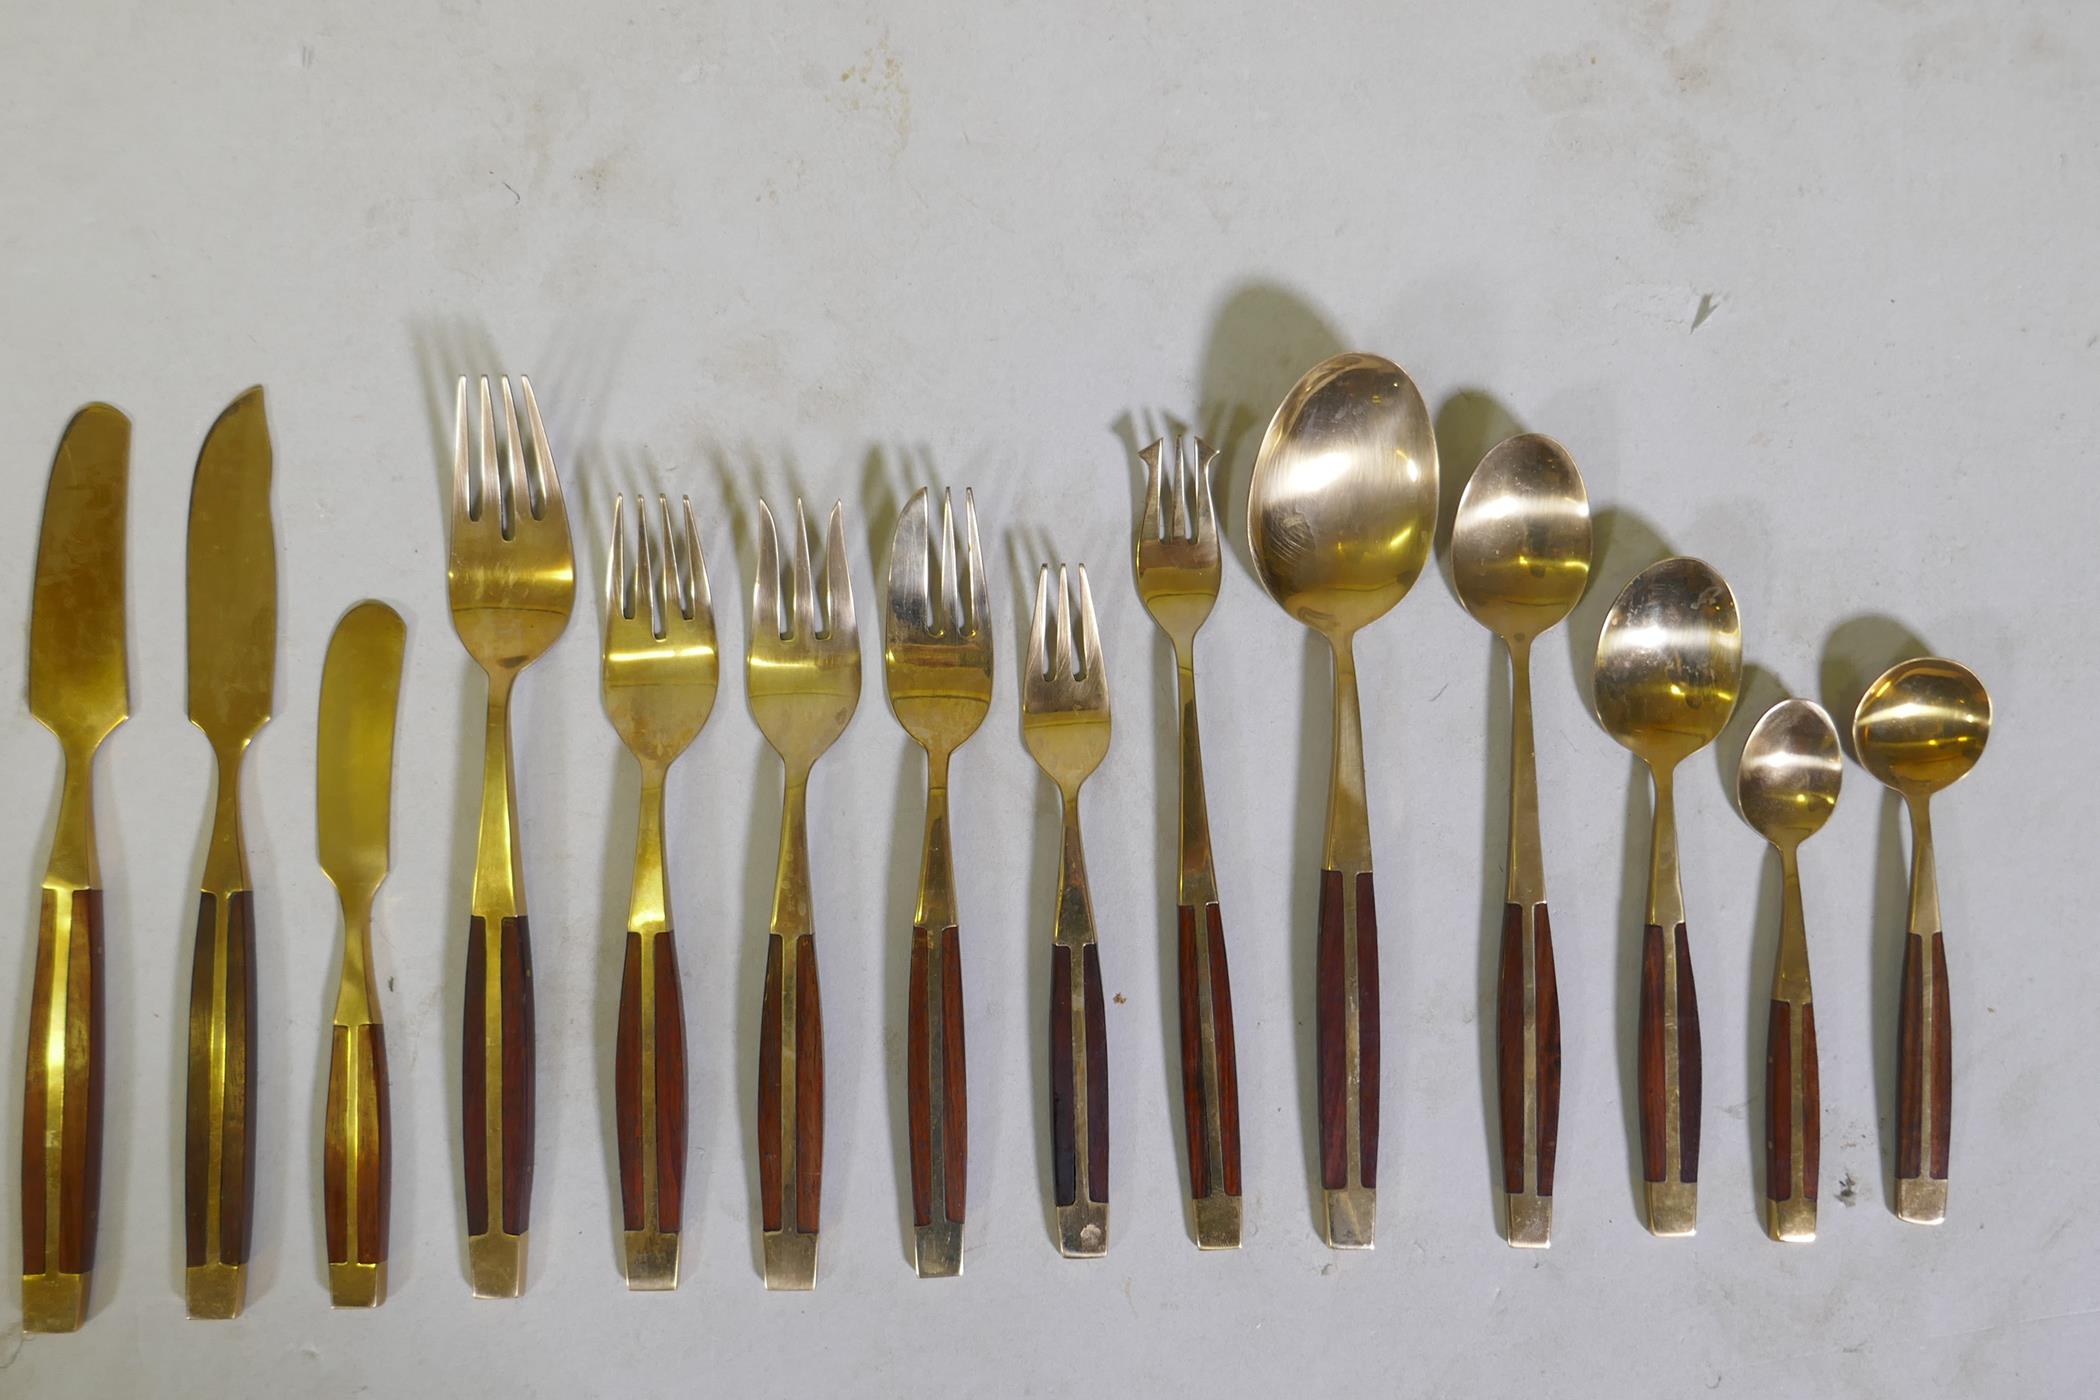 A canteen of brass and rosewood cutlery, probably Thai or Malaysian, 12 place settings - Image 7 of 7